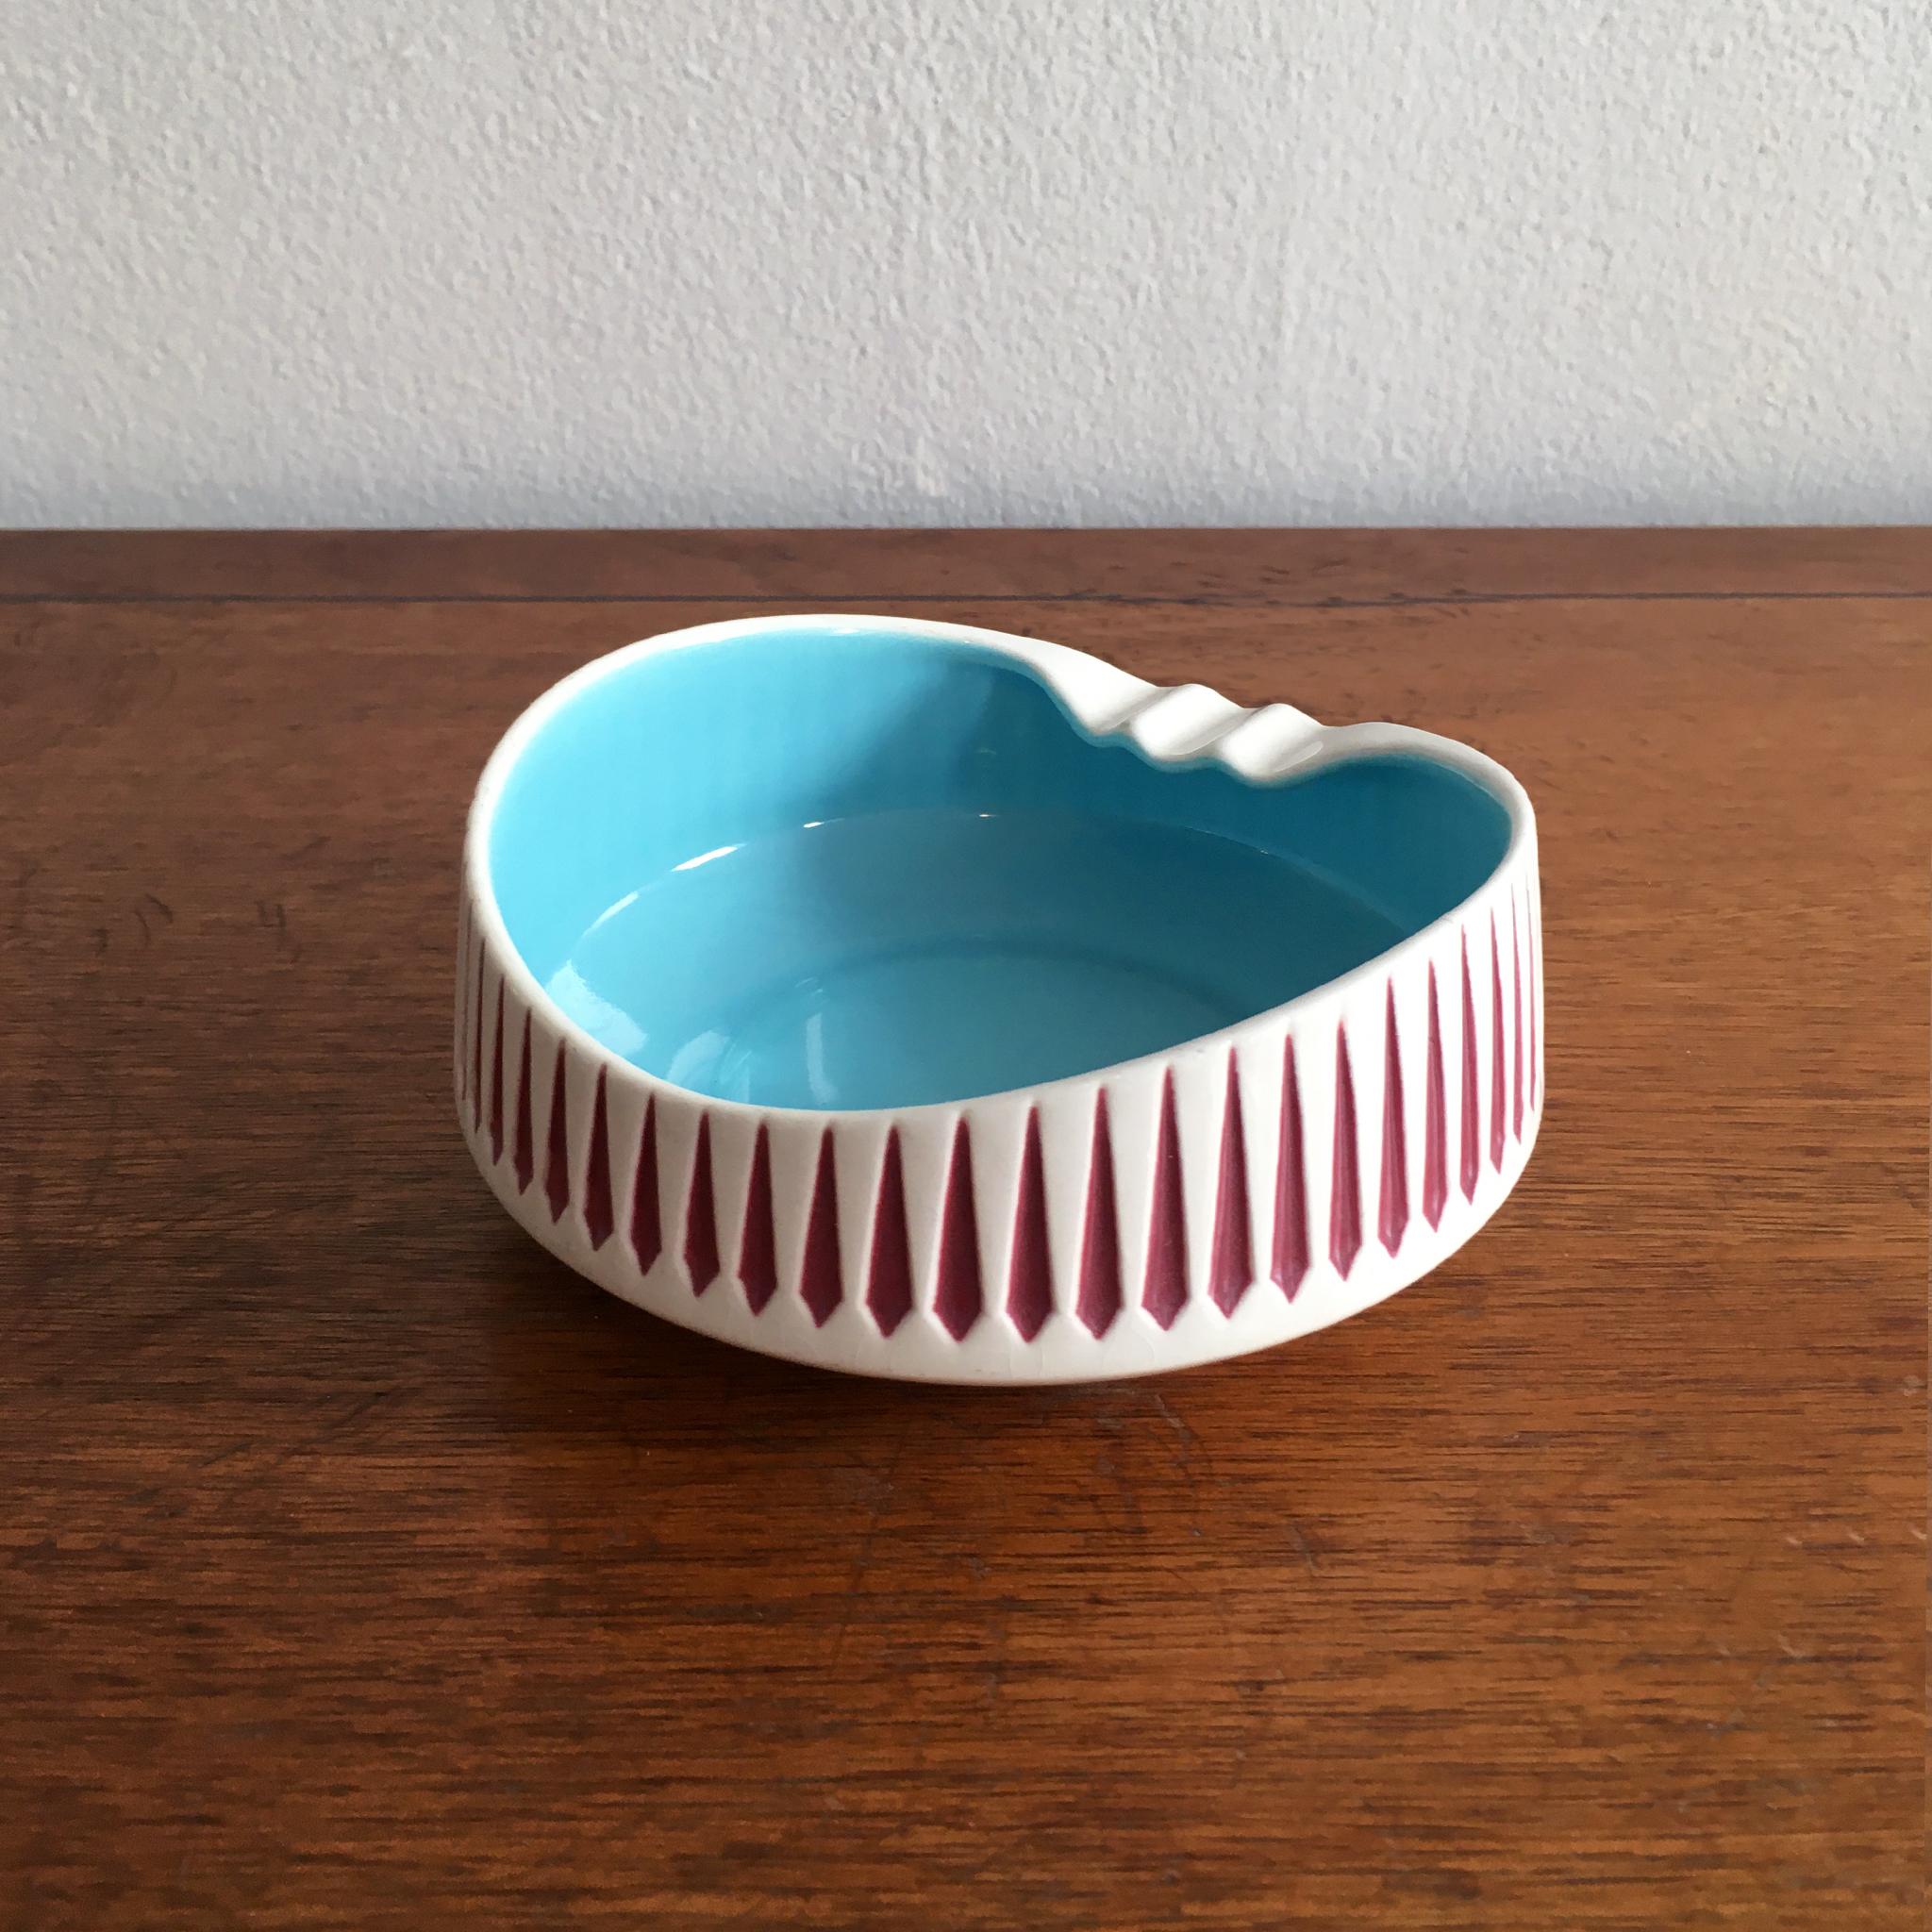 Mid-Century Modern Hornsea Pottery Midcentury Ashtray Catchall in White and Aqua by John Clappison